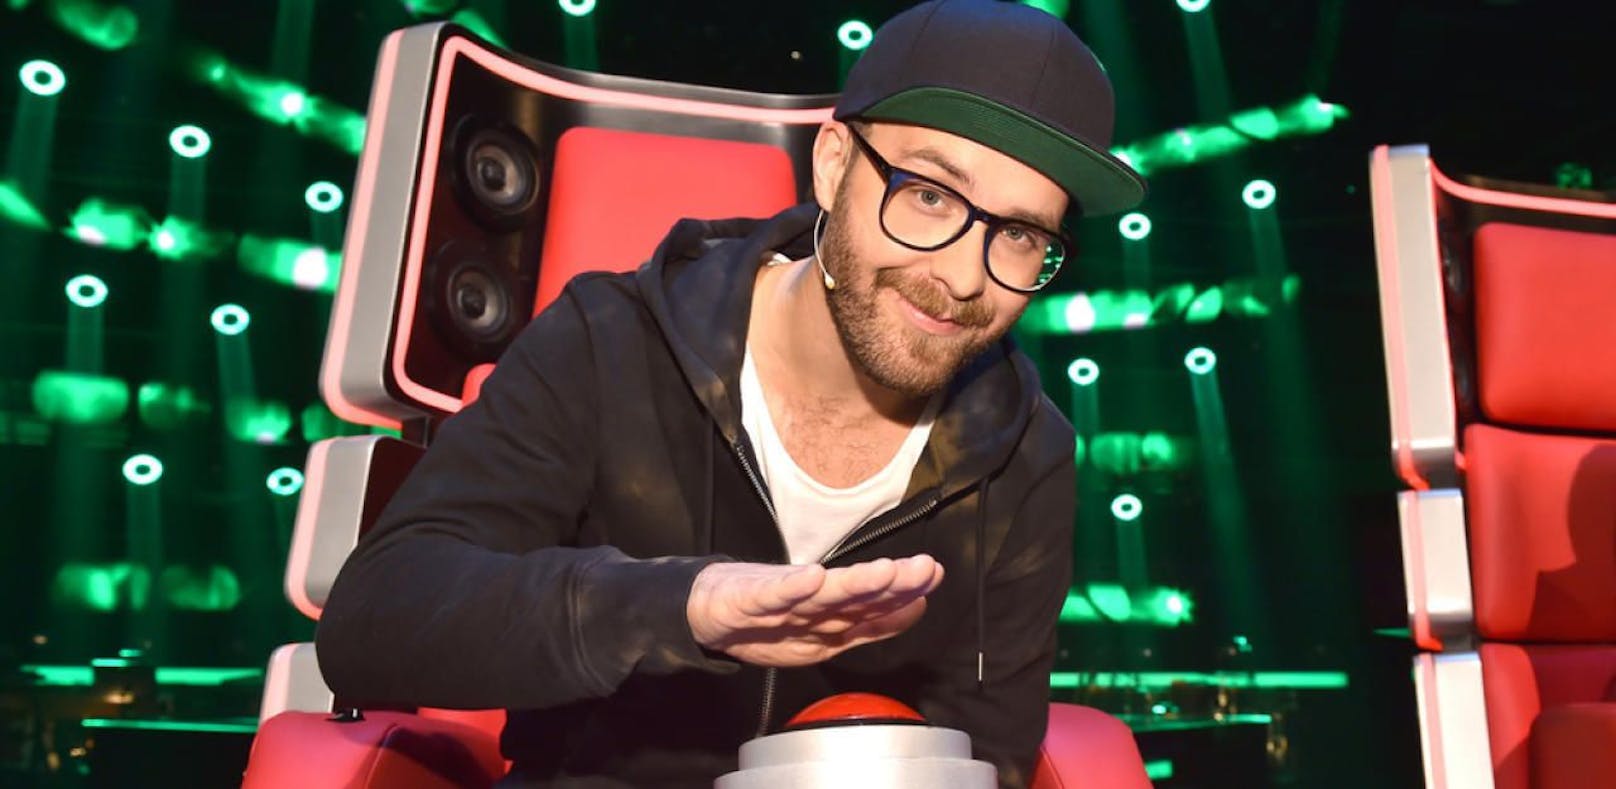 "The Voice": Mark Forster ersetzt Andreas Bourani